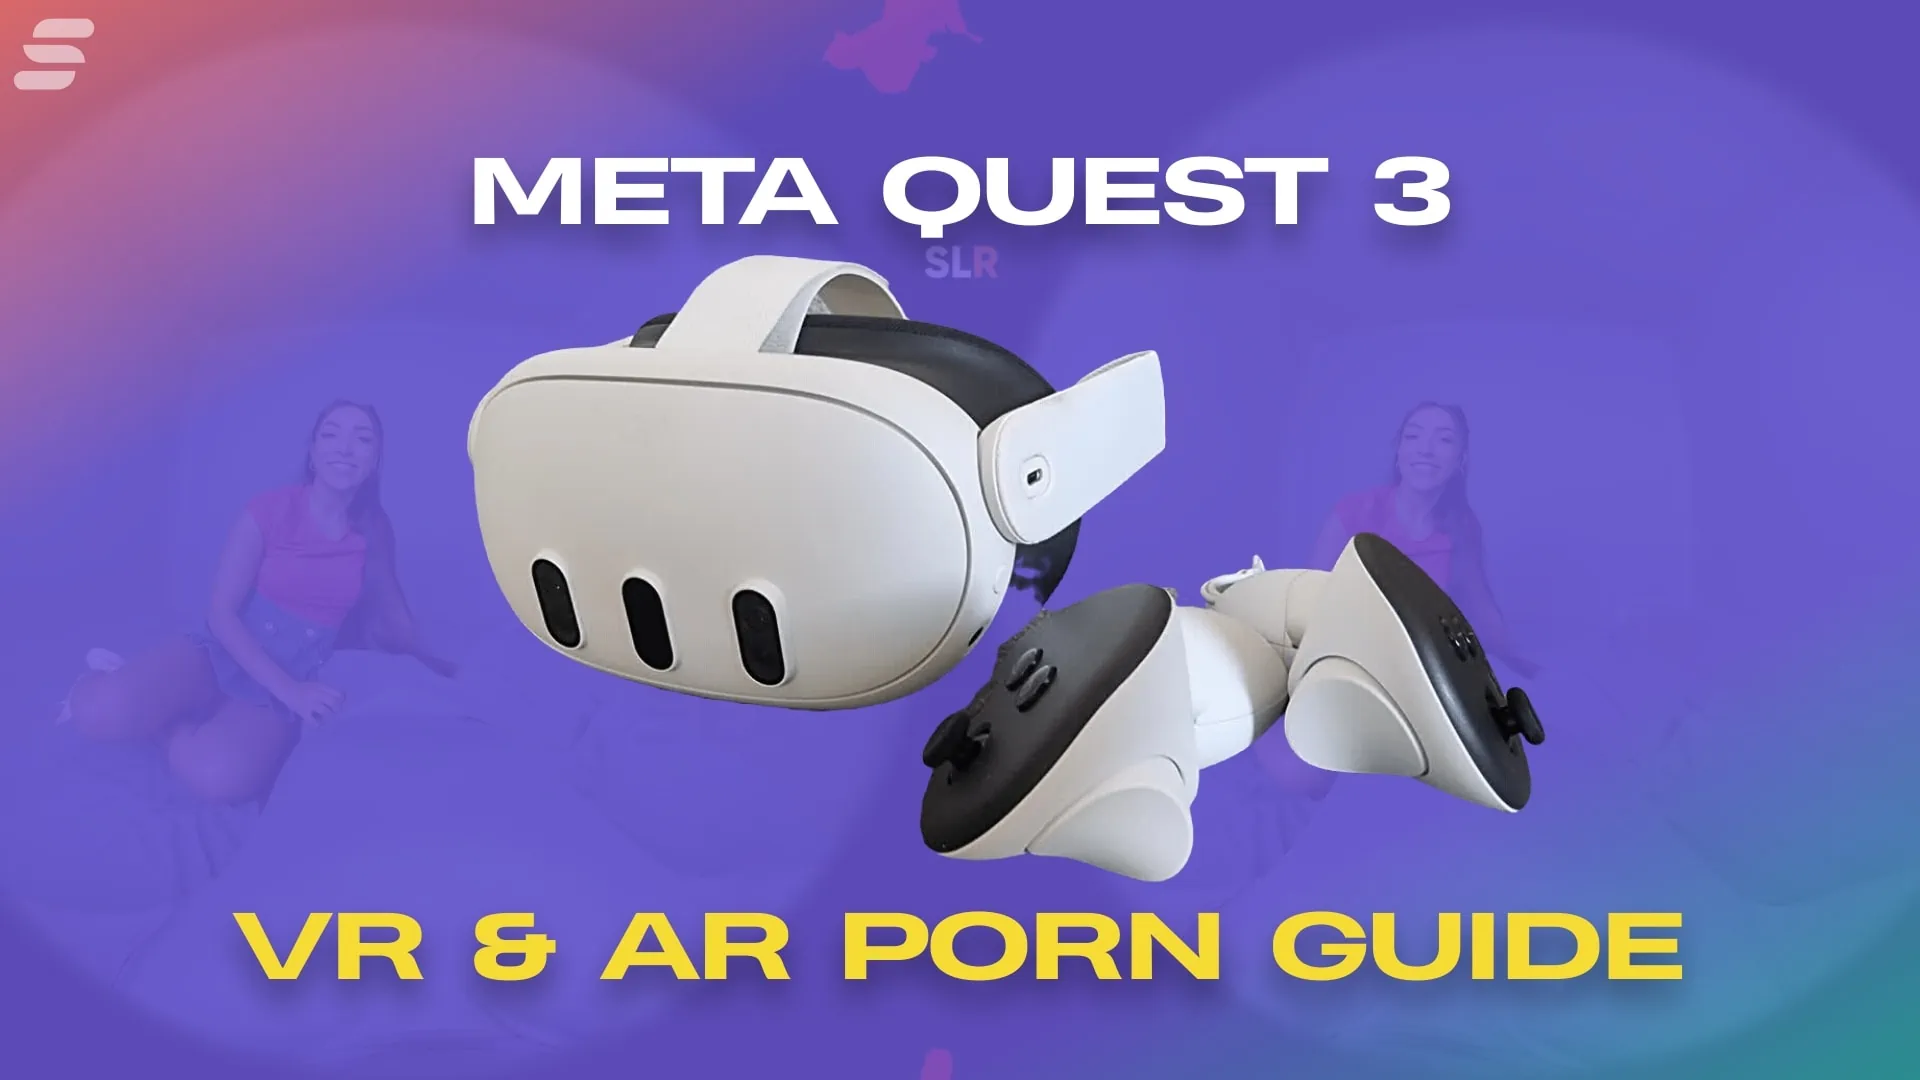 Meta Quest 3 Porn: Complete Guide to Adult AR & VR